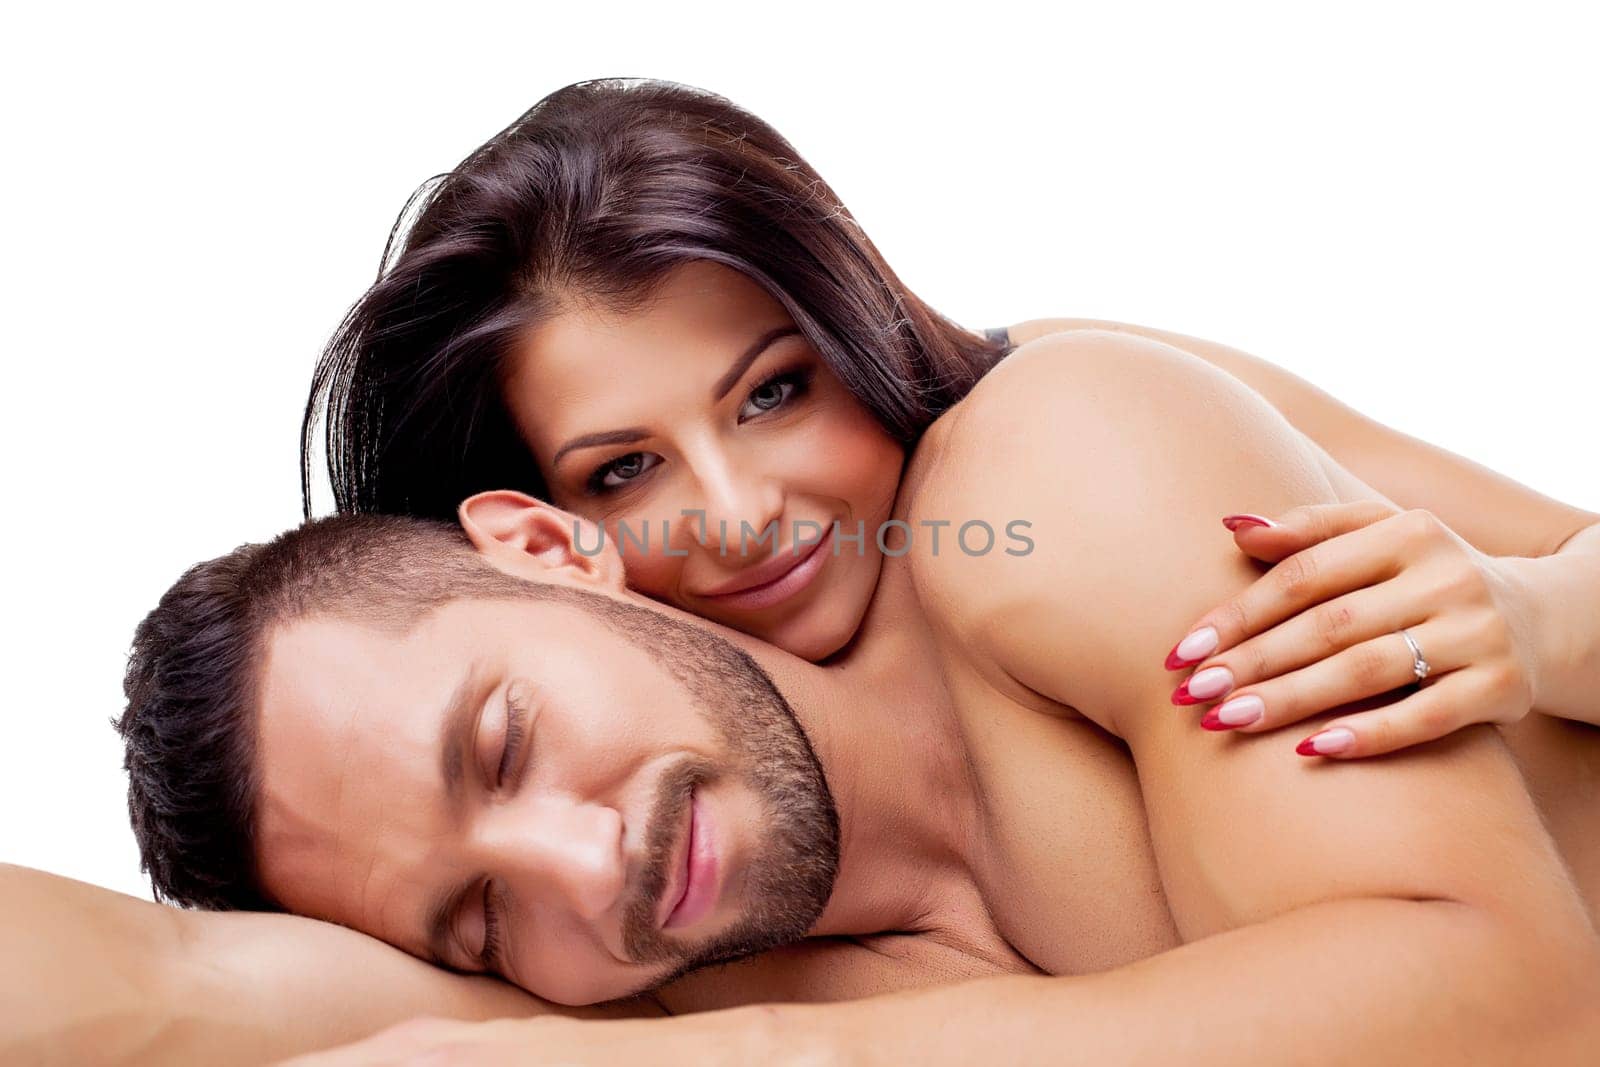 Image of nude lovers smiling dreamily at camera, isolated on white